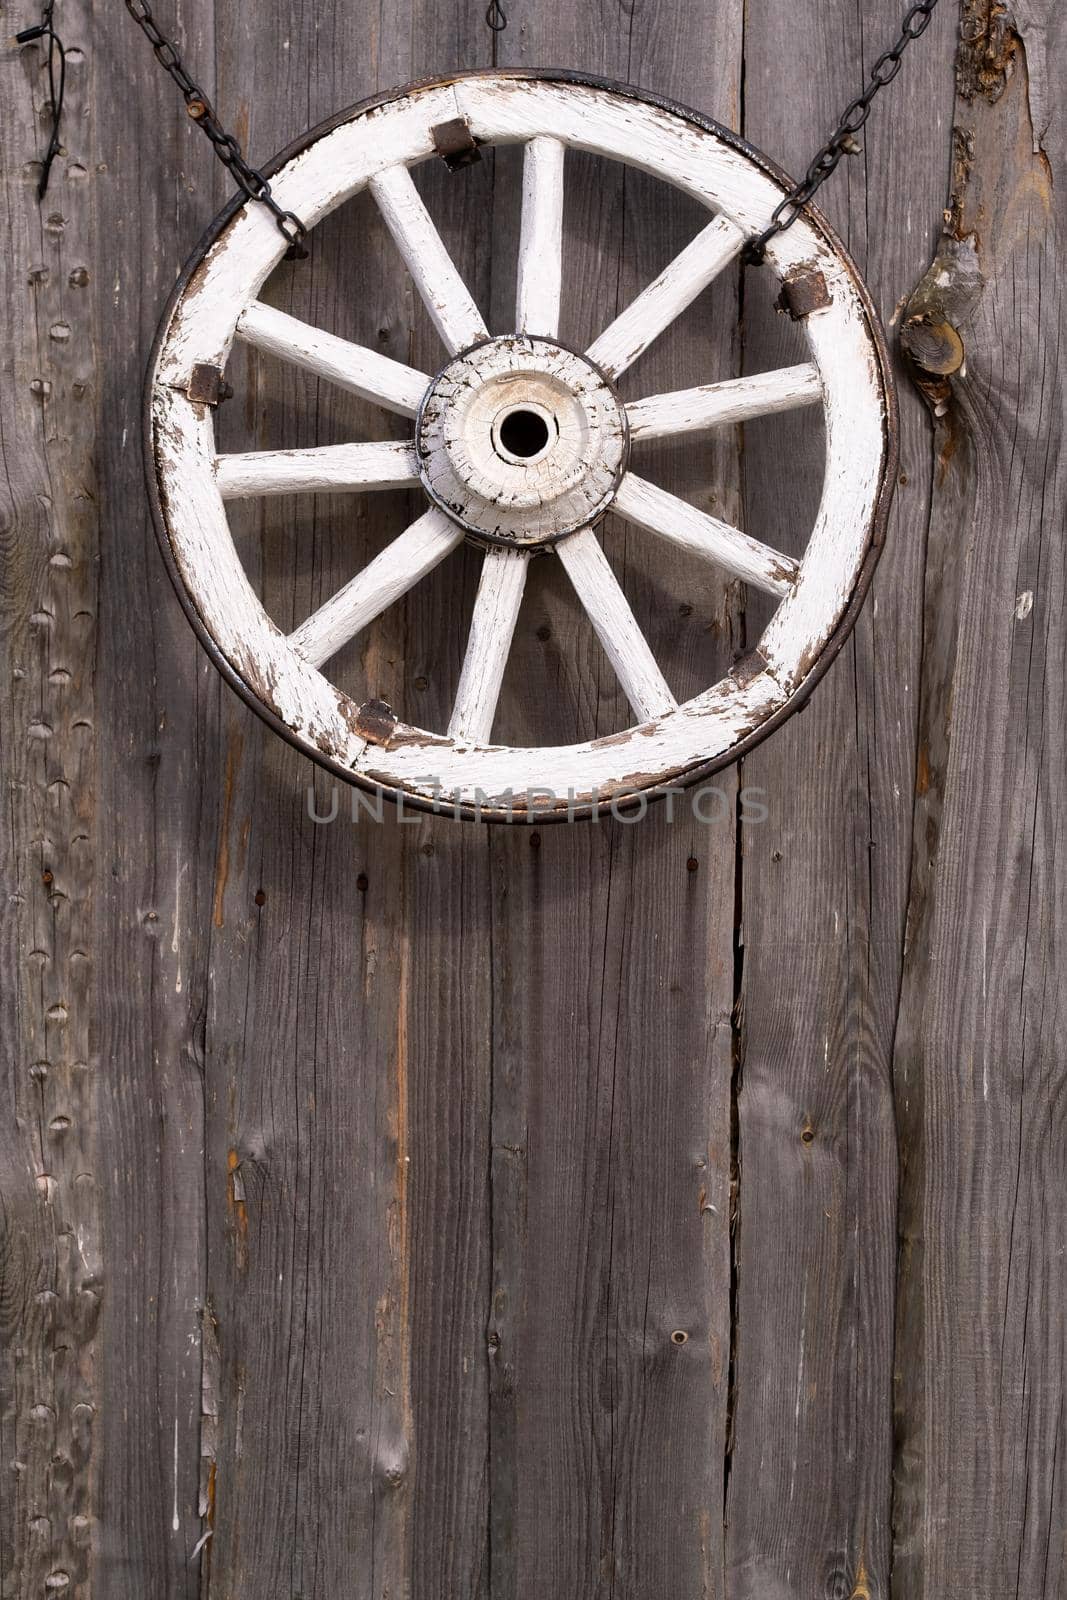 An old wooden carriage wheel hanging on the barn wall by Lobachad